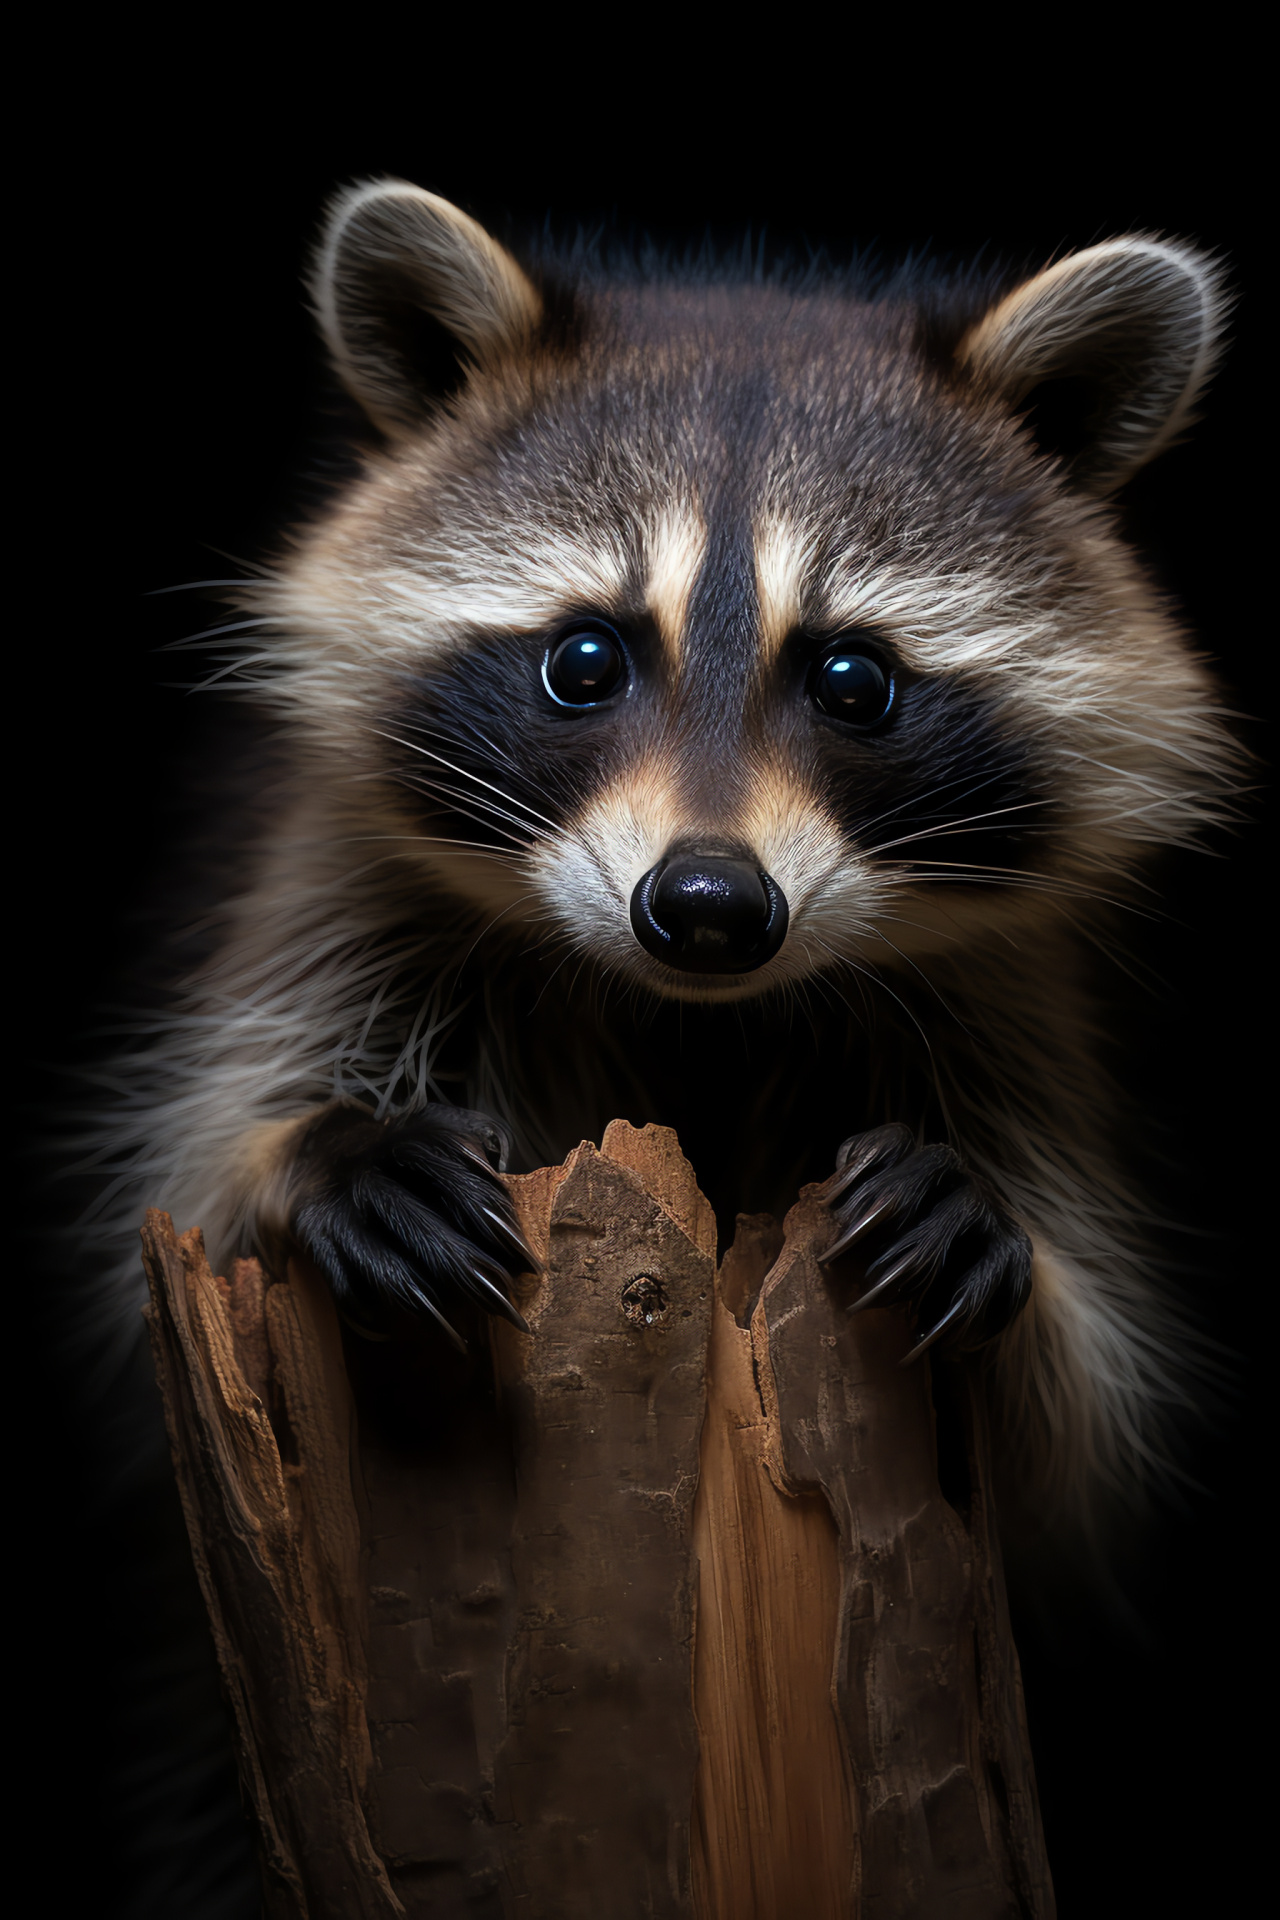 Raccoon observation, furry forager, backyard visitor, nocturnal eyes, urban animal, HD Phone Wallpaper